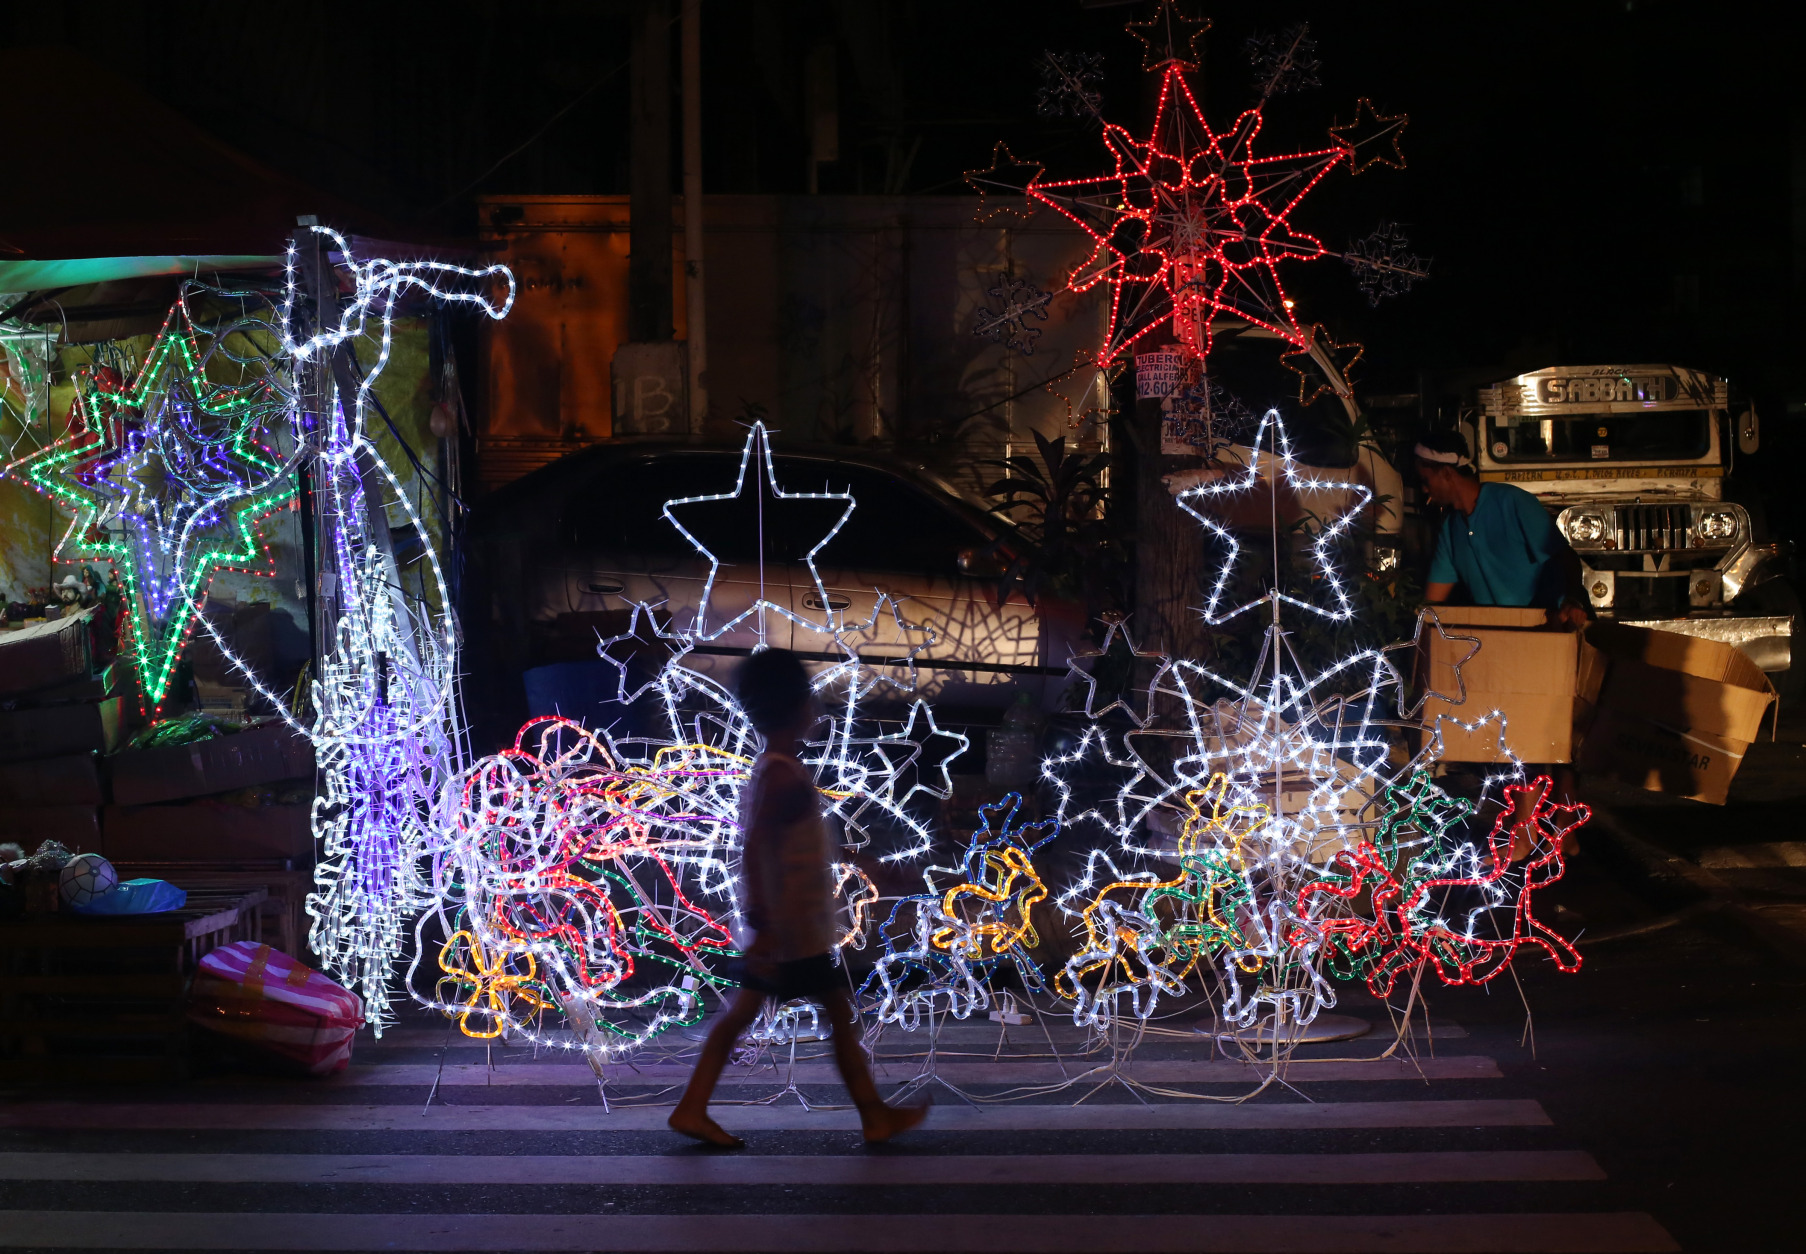 A Filipino boy walks past Christmas decorations for sale in Manila, Philippines on Monday, Dec. 22, 2014. Christmas is one of the most important holidays in this predominantly Roman Catholic nation. (AP Photo/Aaron Favila)